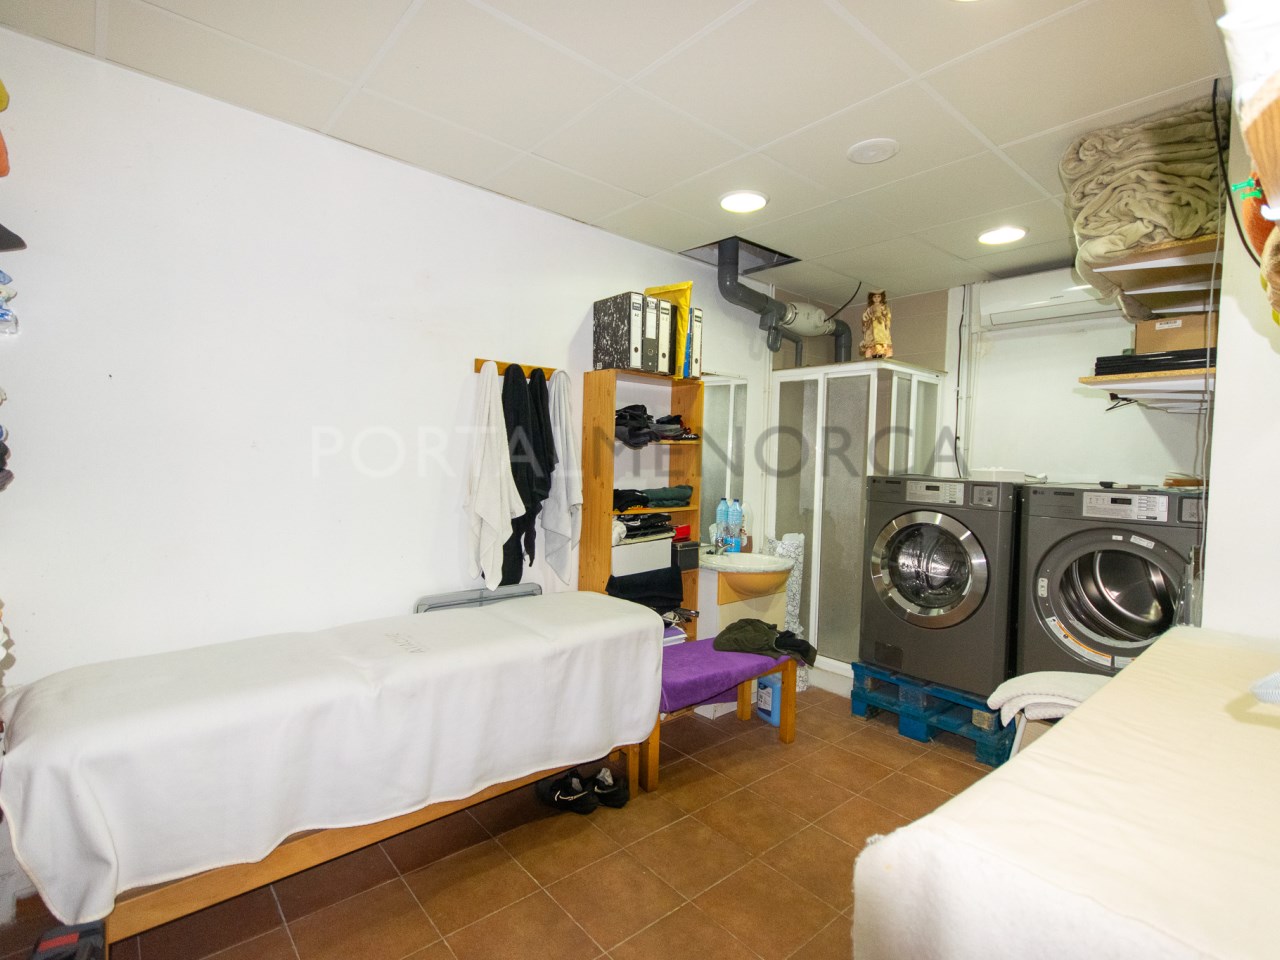 Laundry area in a building for sale in the village of Sant Lluis